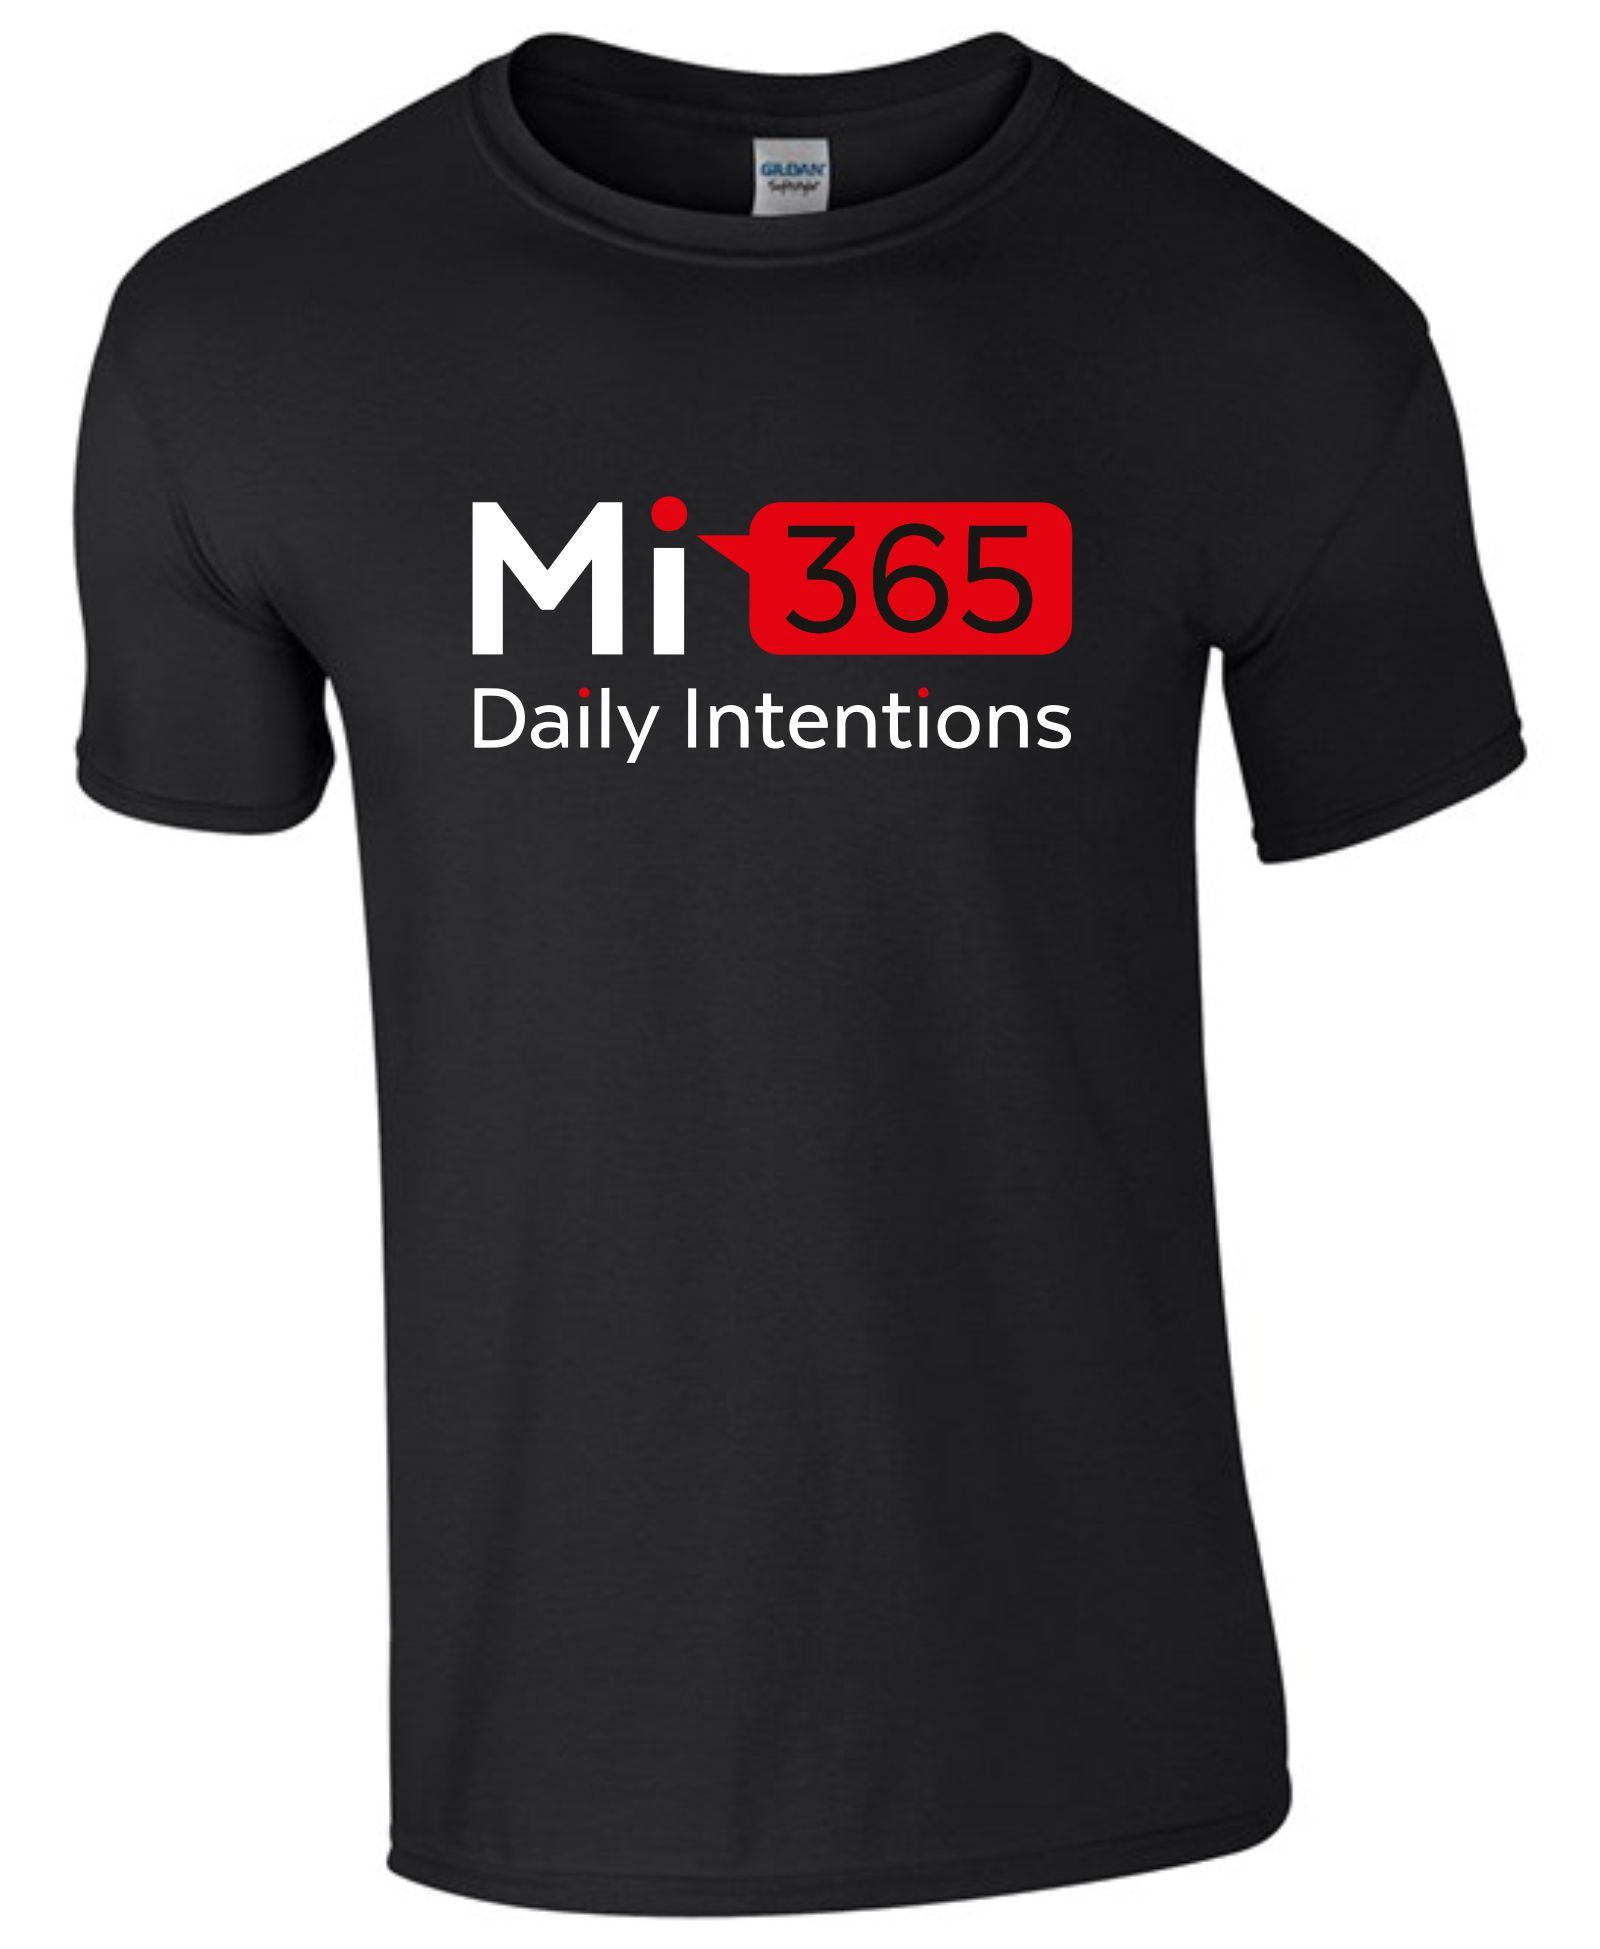 Mi365 Daily Intentions - T-Shirt